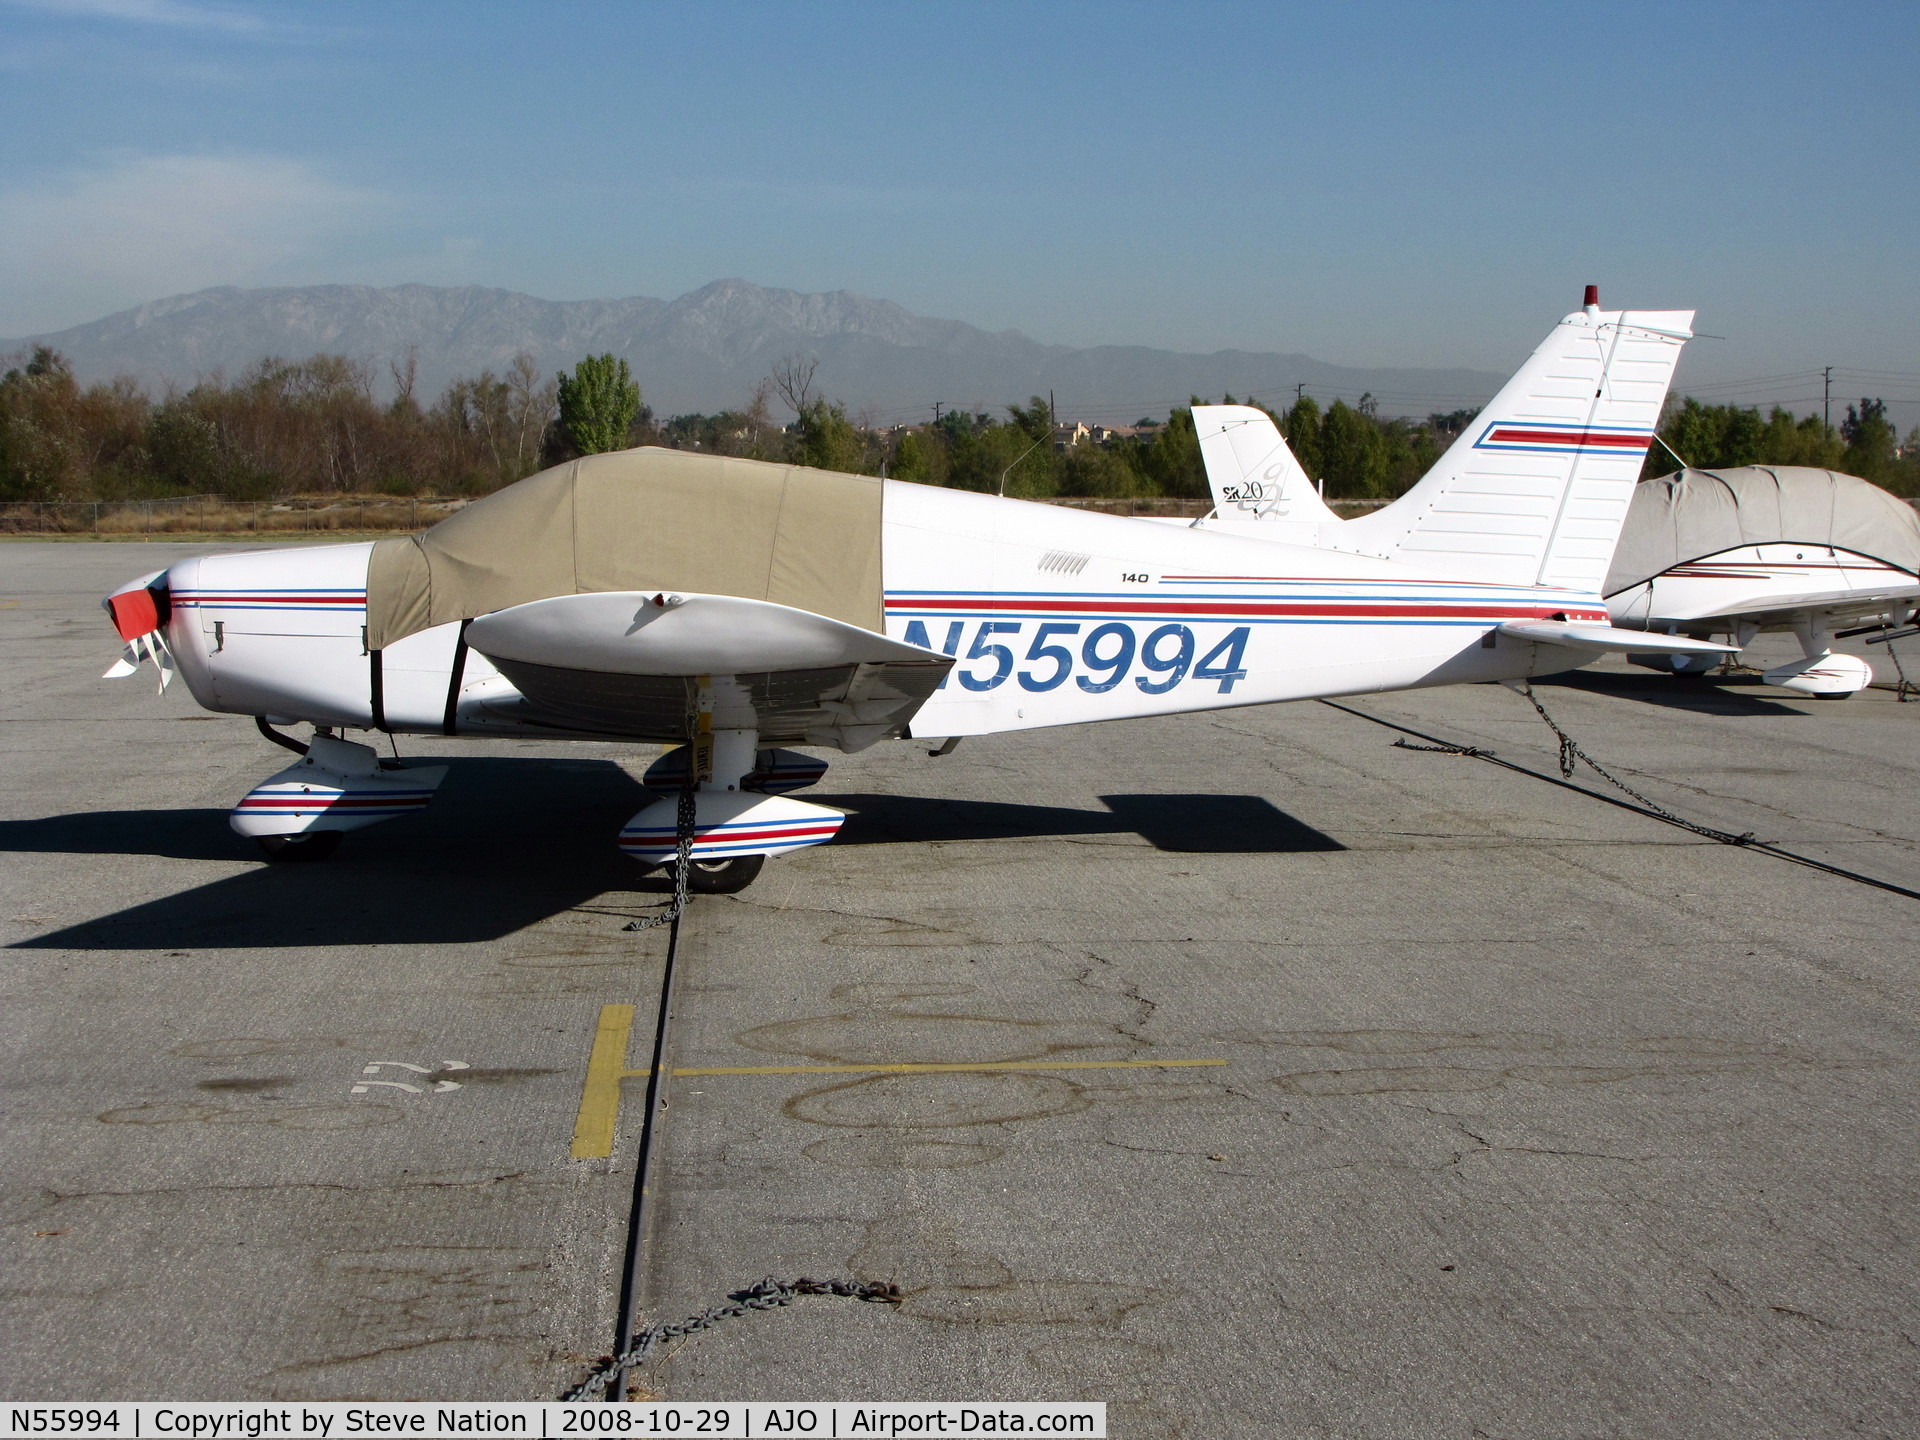 N55994, 1973 Piper PA-28-140 Cherokee C/N 28-7325550, 1969 piper PA-28-140 for sale and glass covered @ 